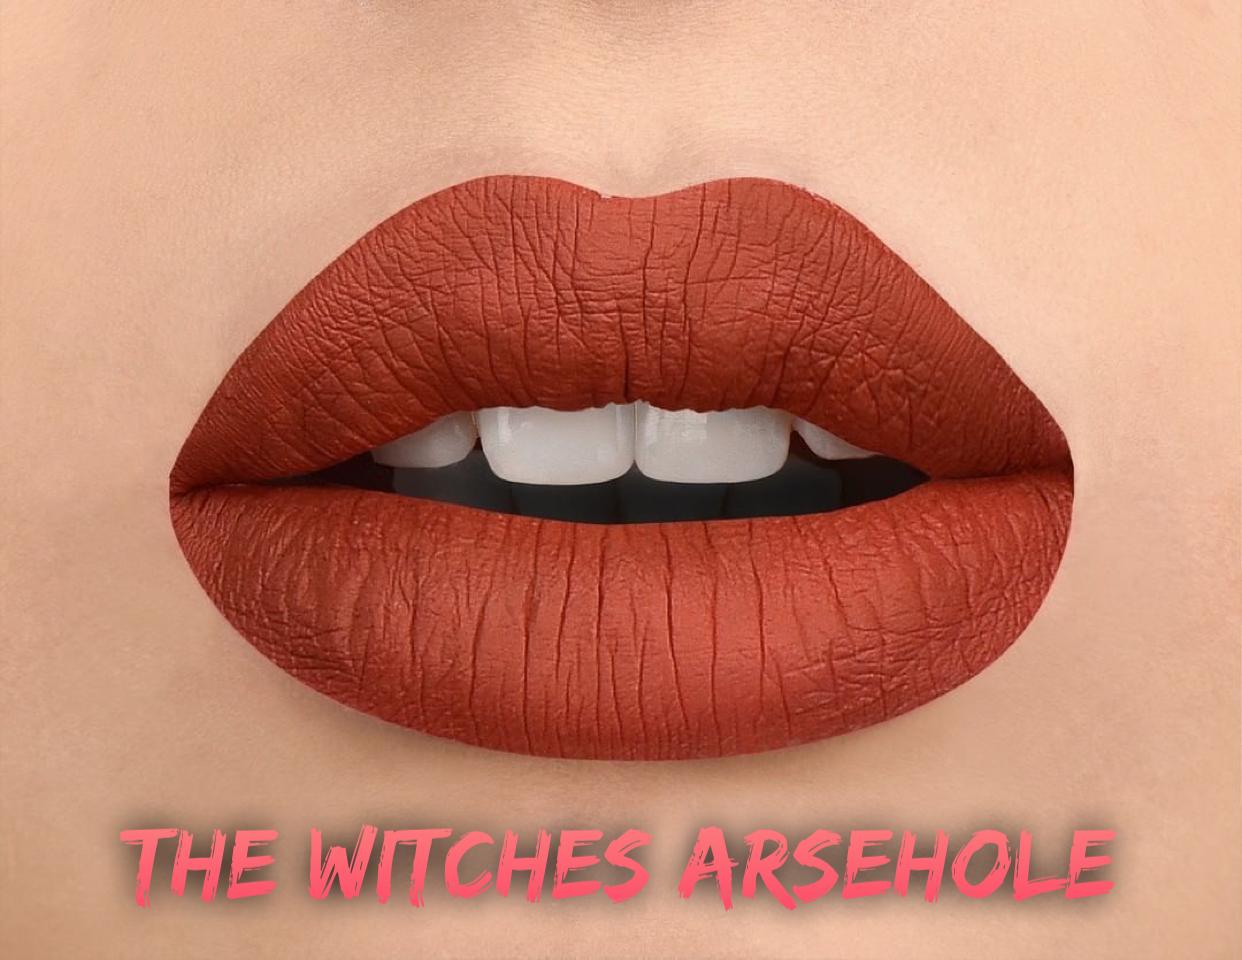 The Witches Ar*ehole